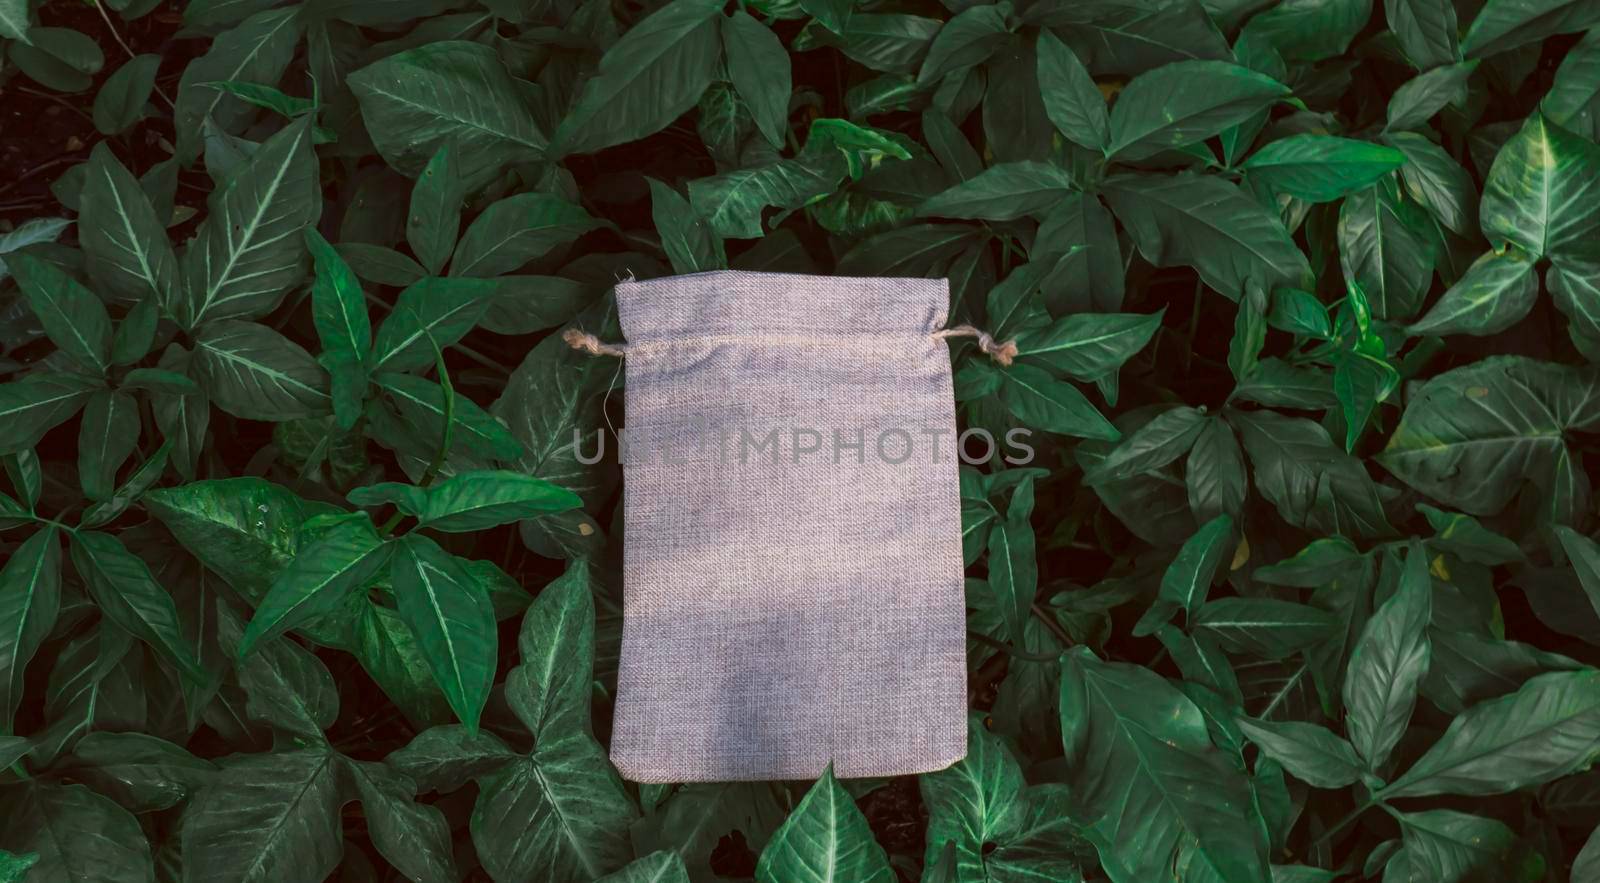 Blank Mockup Linen Cotton Tote Bag on Green Bush Trees Foliage Background. Eco Nature Friendly Style. Environmental Conservation Recycling Concept. Template for Artwork Text